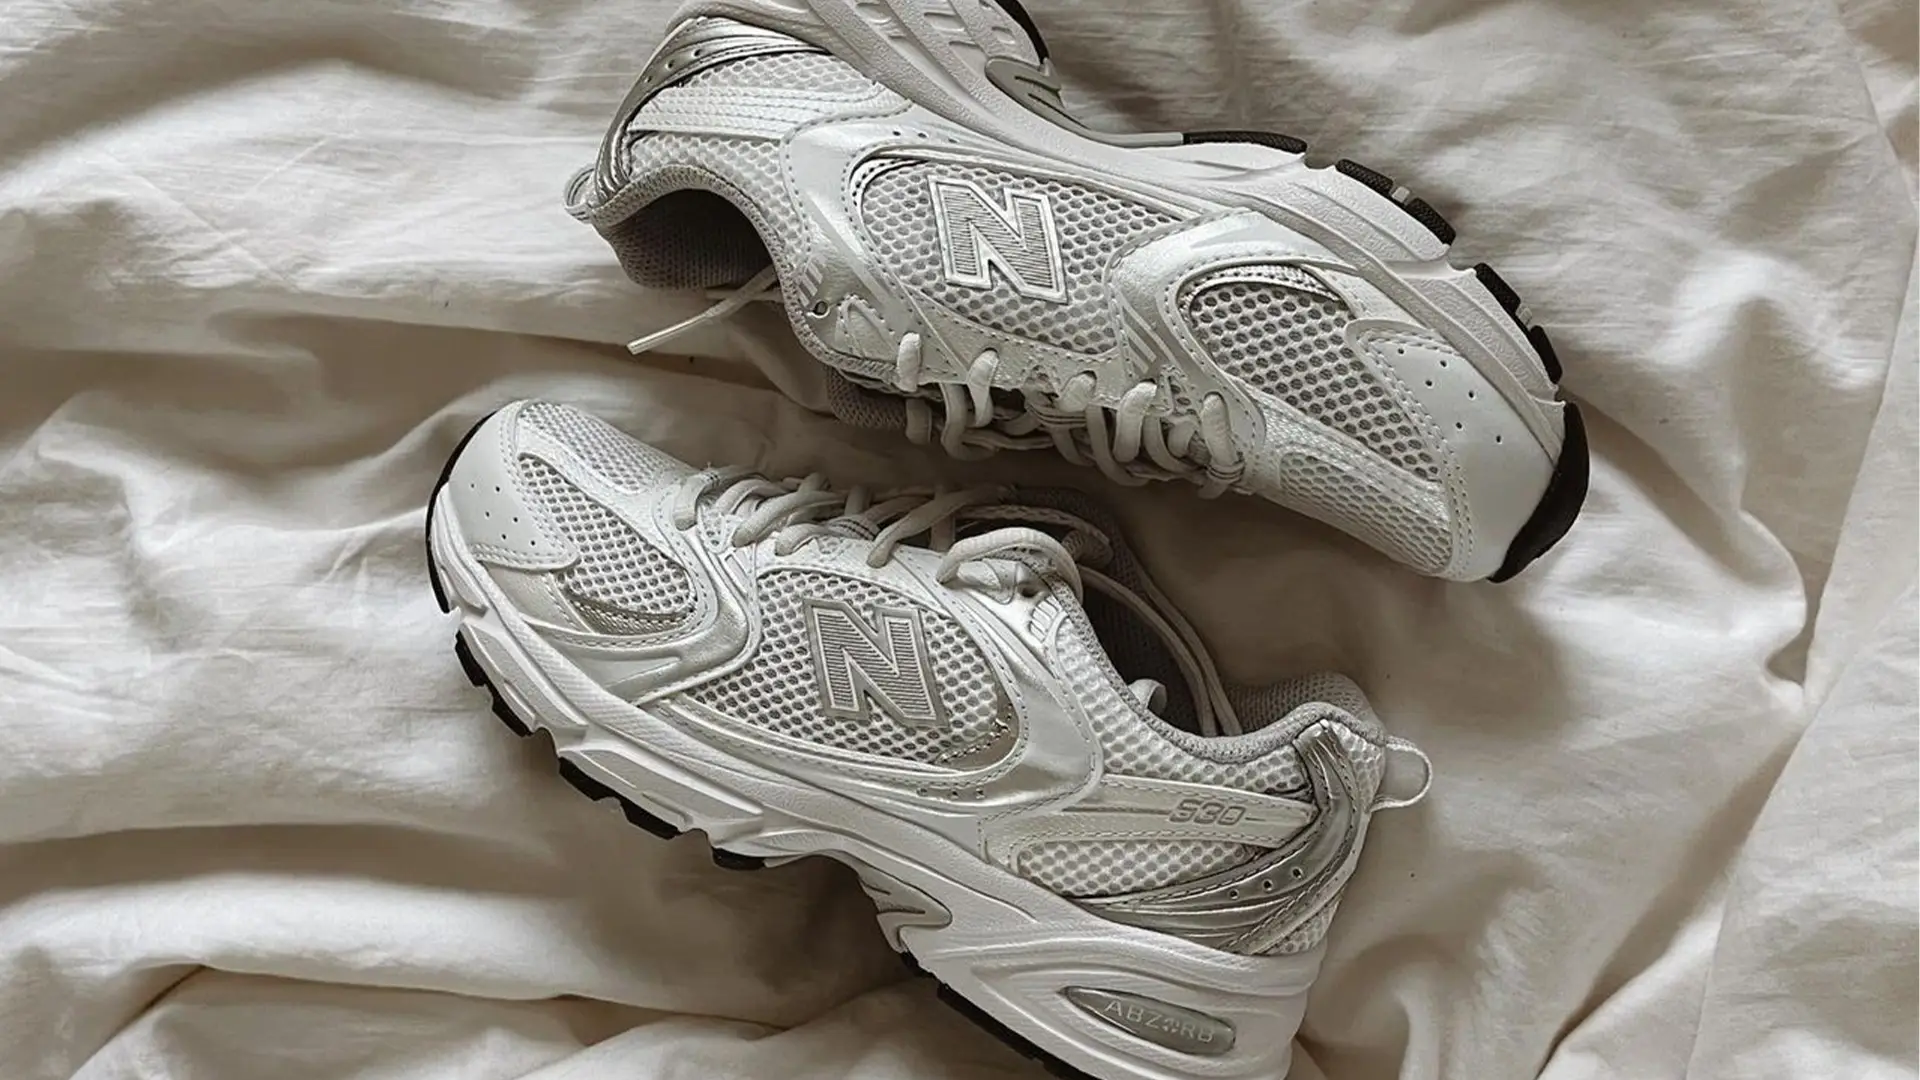 Sporty Yet Stylish: Why the New Balance 530 is a Rotation Must-Have ...